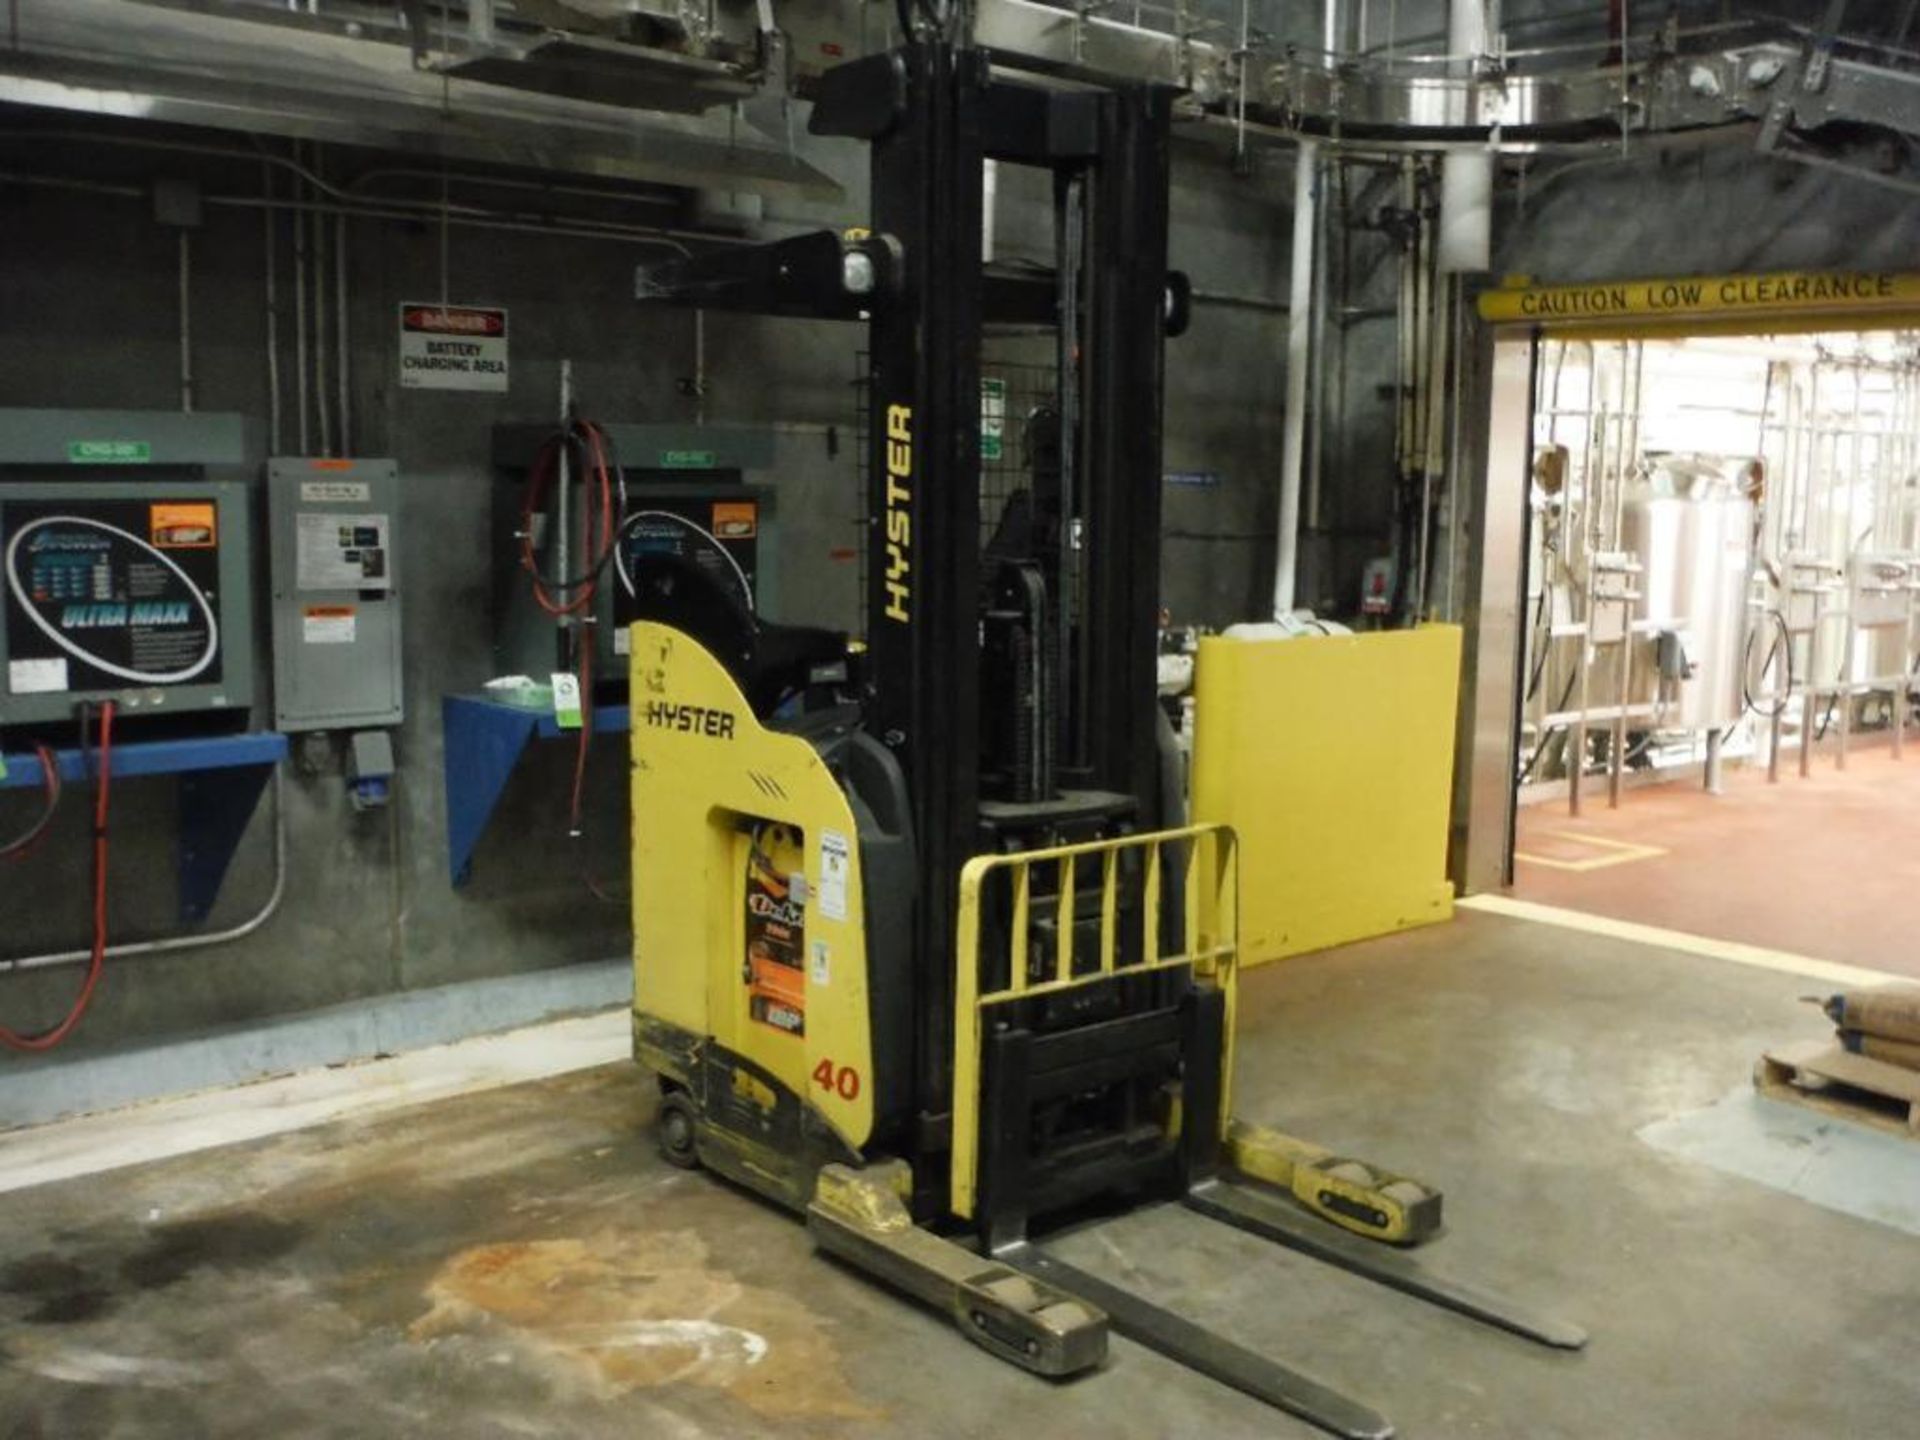 Hyster 36 volt stand up forklift, Model N40ZR-16.5, SN D470N01959F, 4000 lb. capacity, 242 in. lift